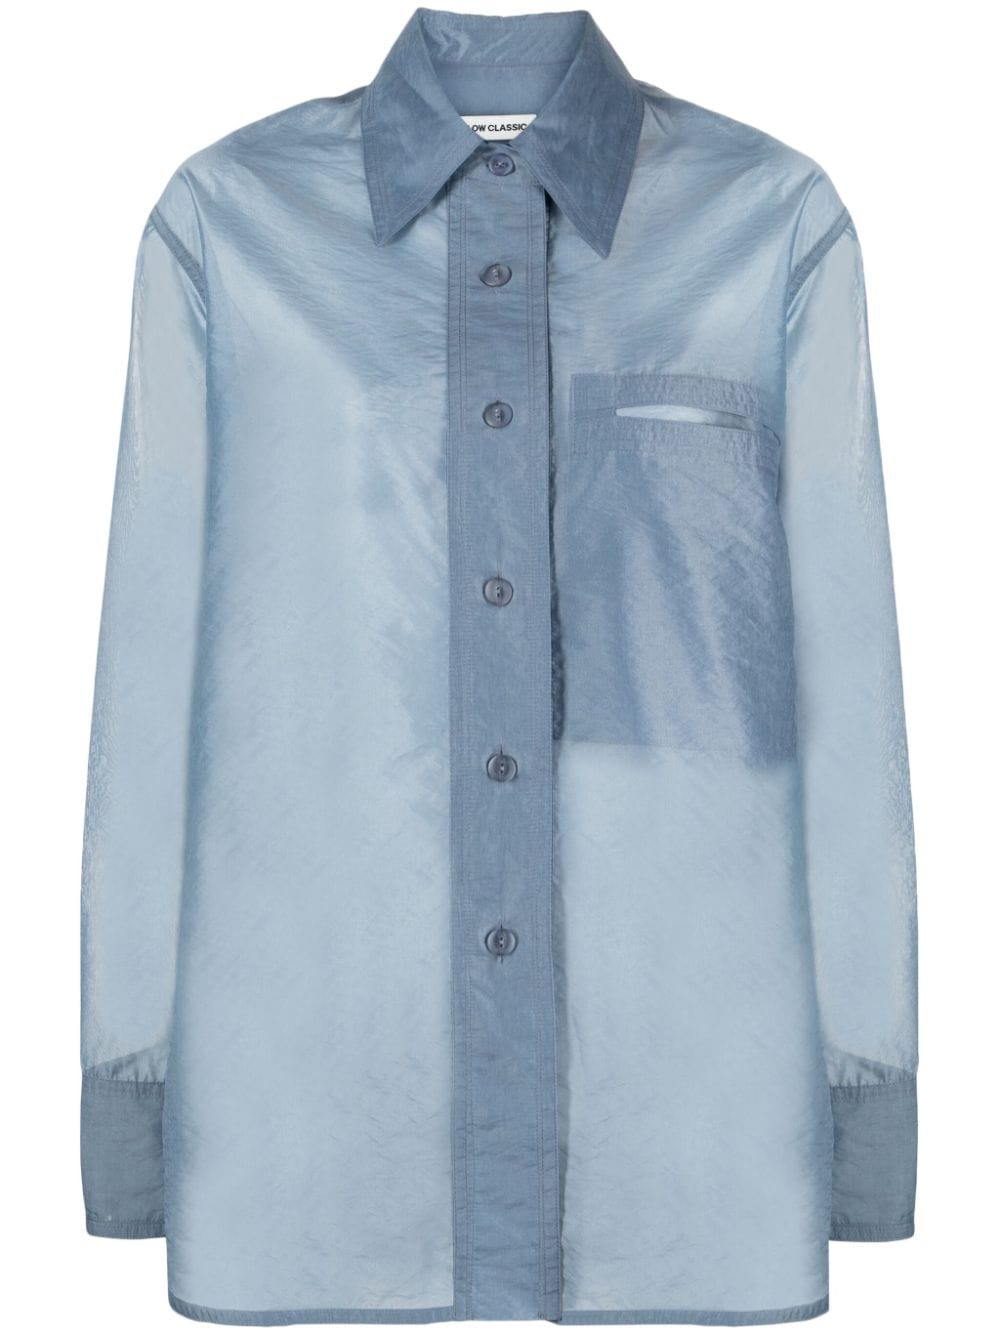 Low Classic semi-sheer buttoned shirt - Blue von Low Classic